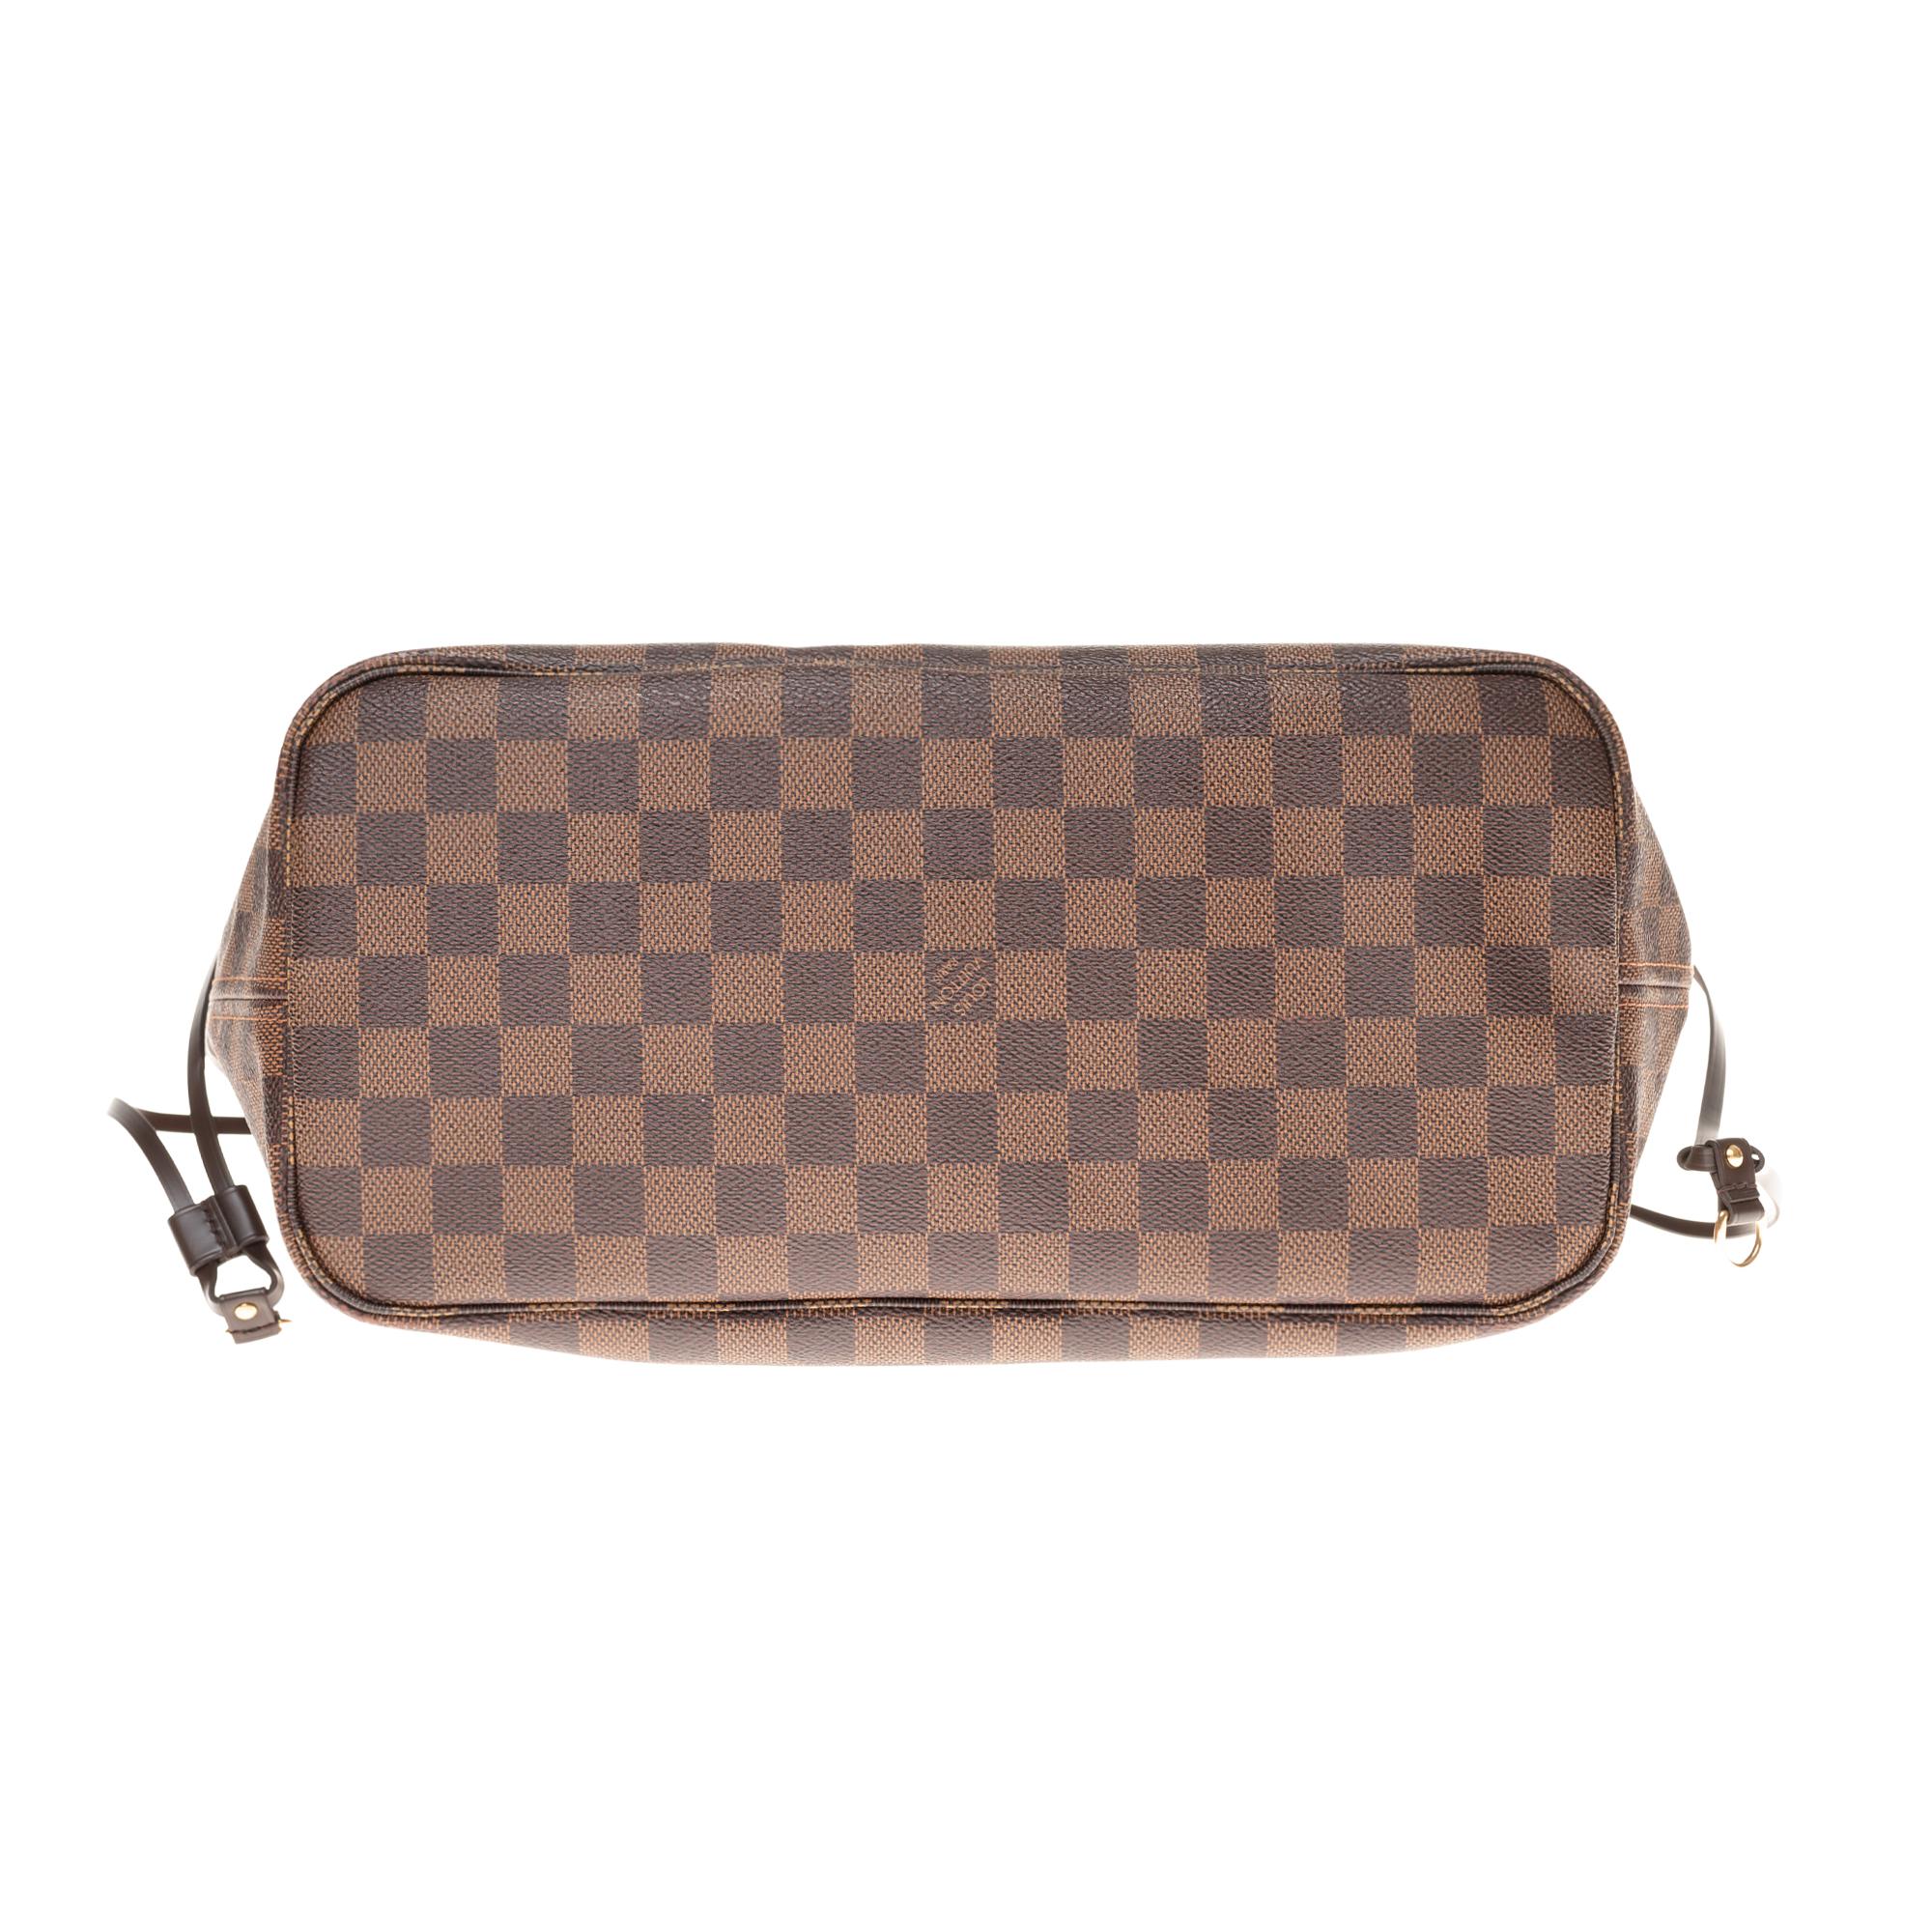 Louis Vuitton Neverfull MM Tote in brown damier canvas with pouch 6